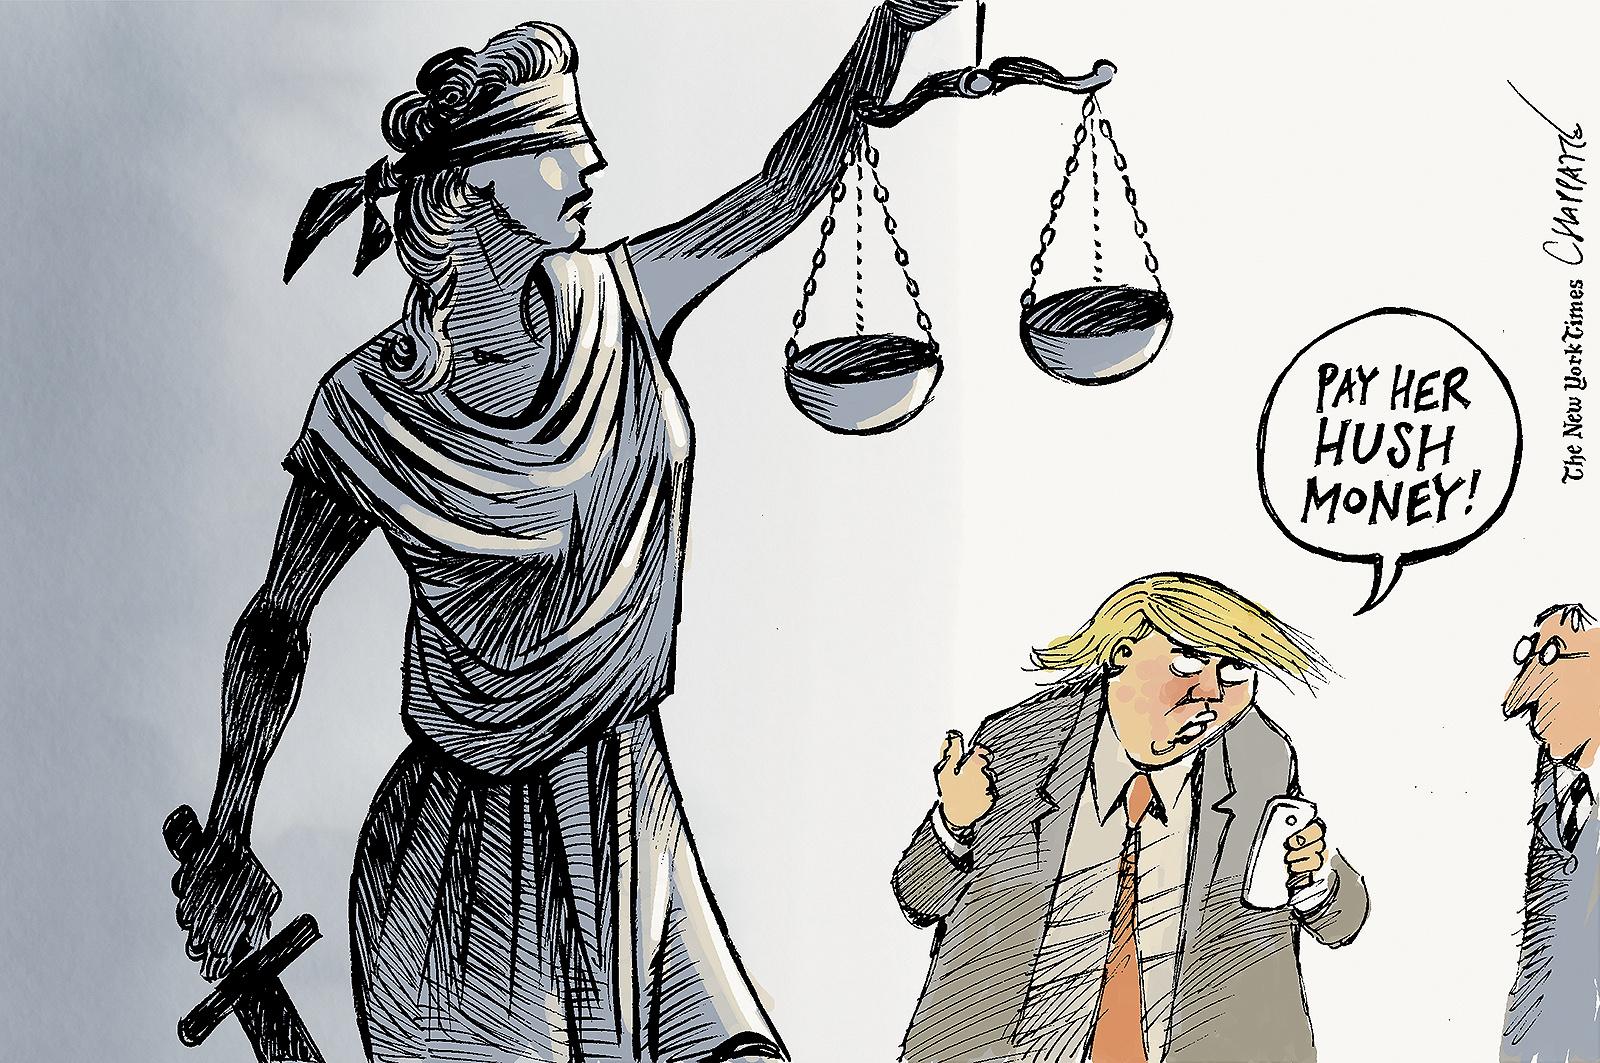 Trump and justice